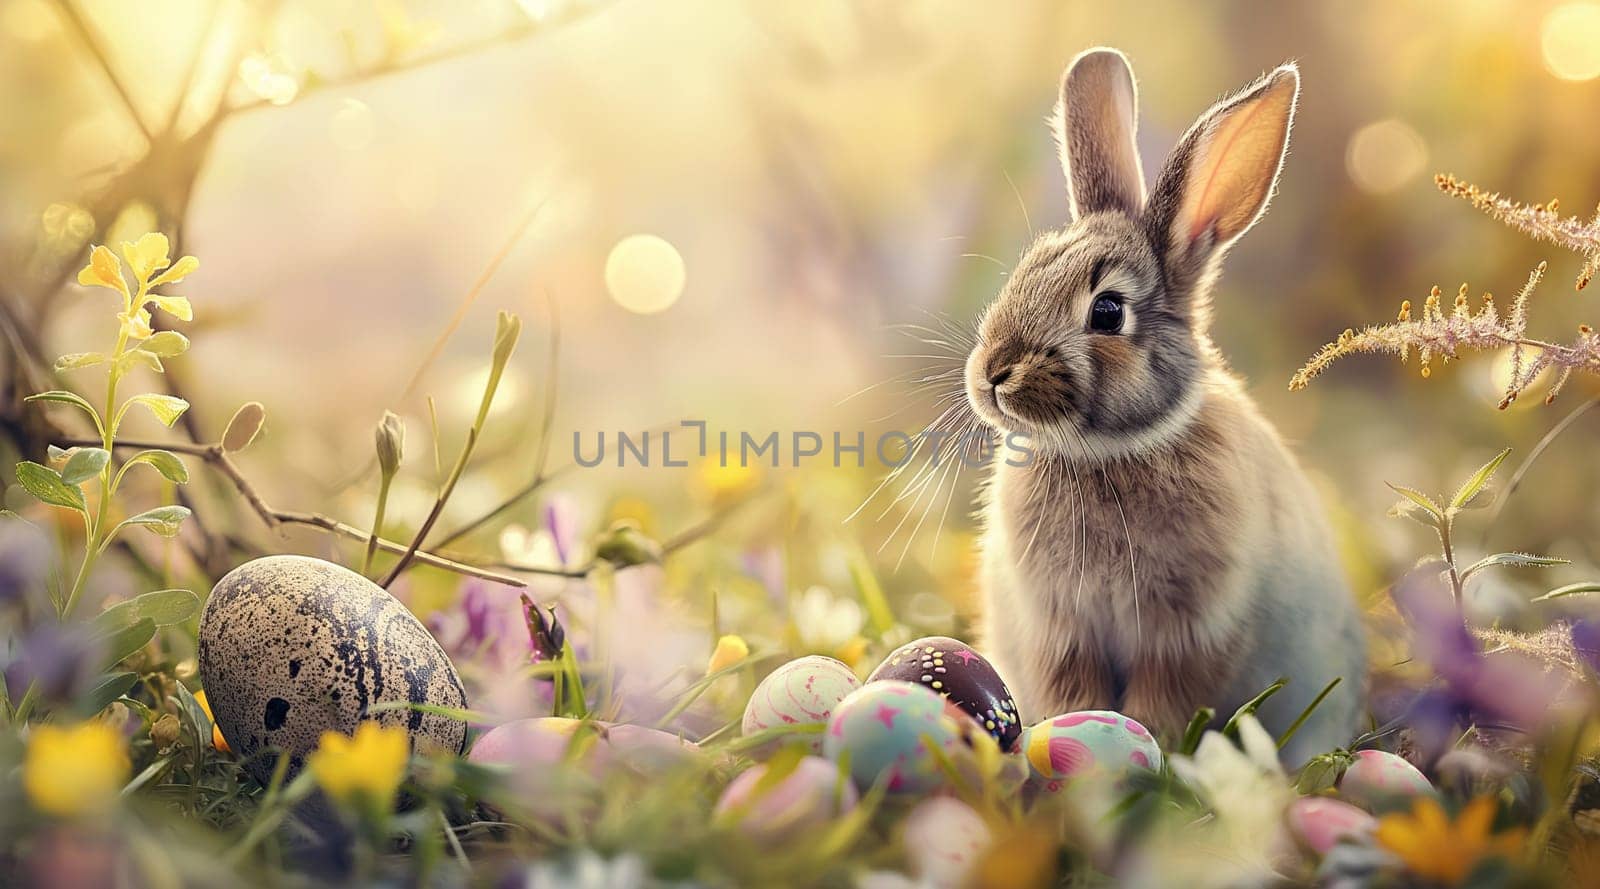 An adorable rabbit sits with colorful Easter eggs nestled in spring flowers at golden hour by kizuneko